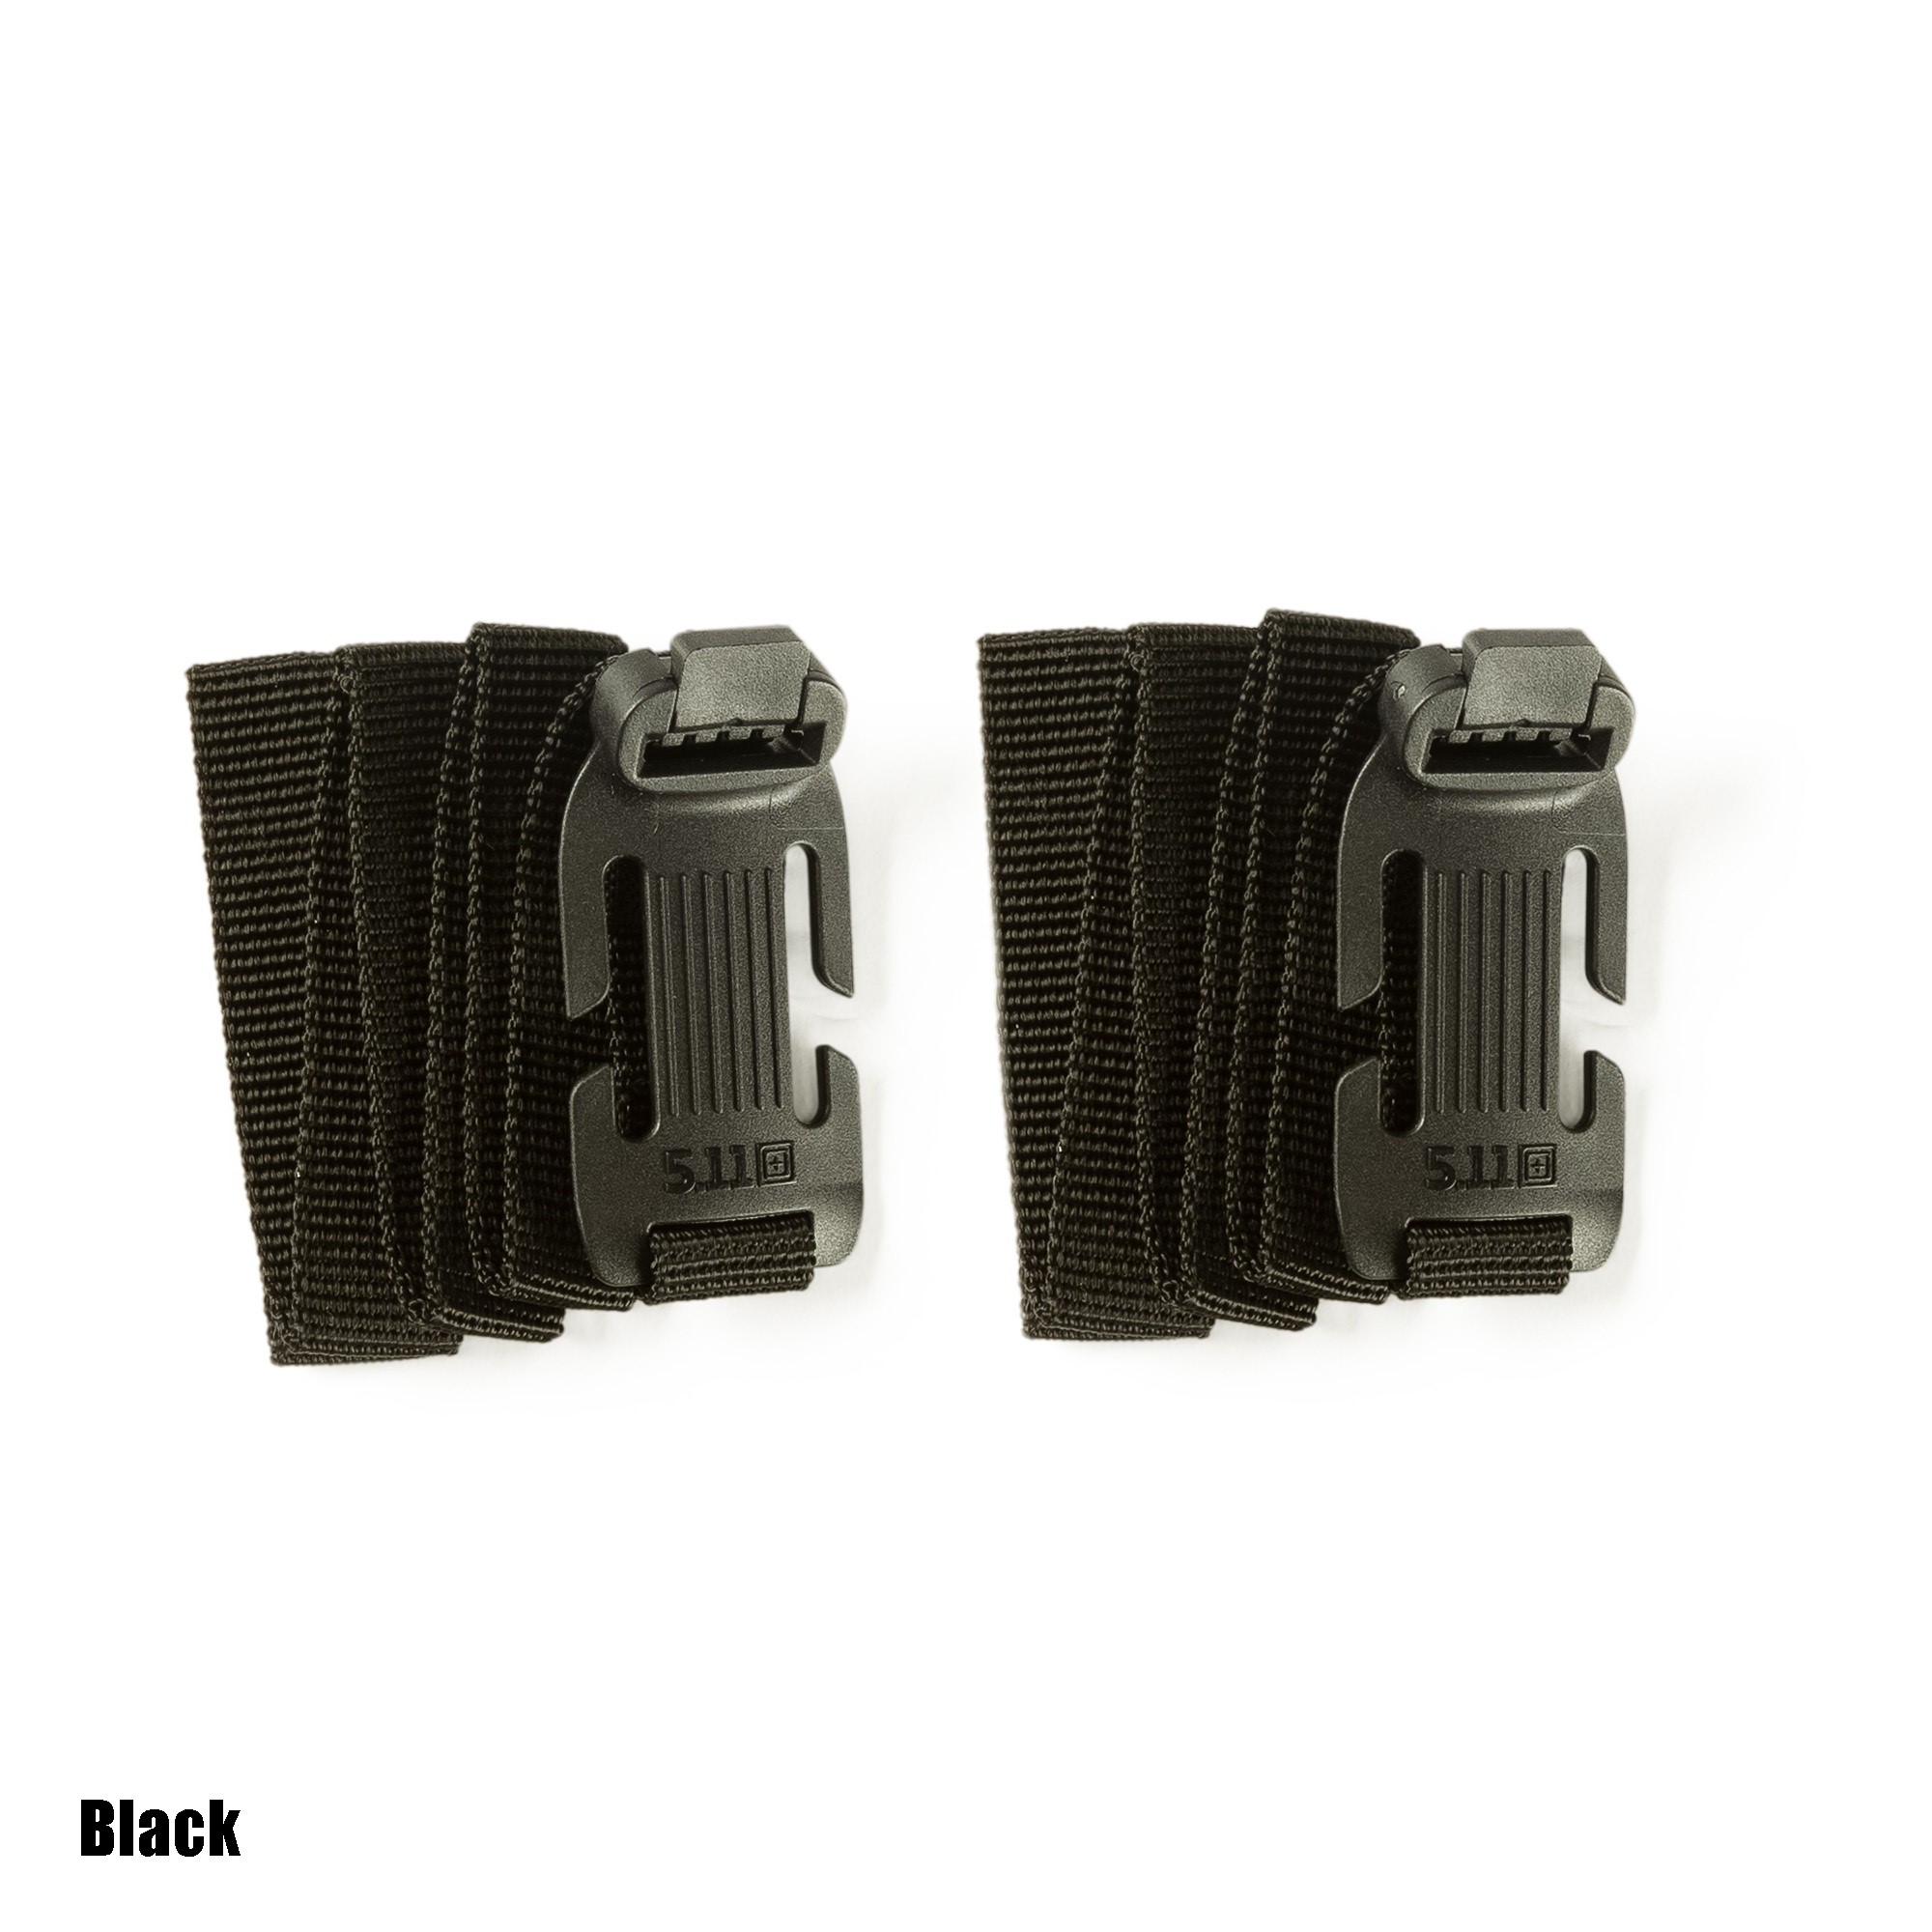 5.11 Sidewinder Straps Small – 2 pack